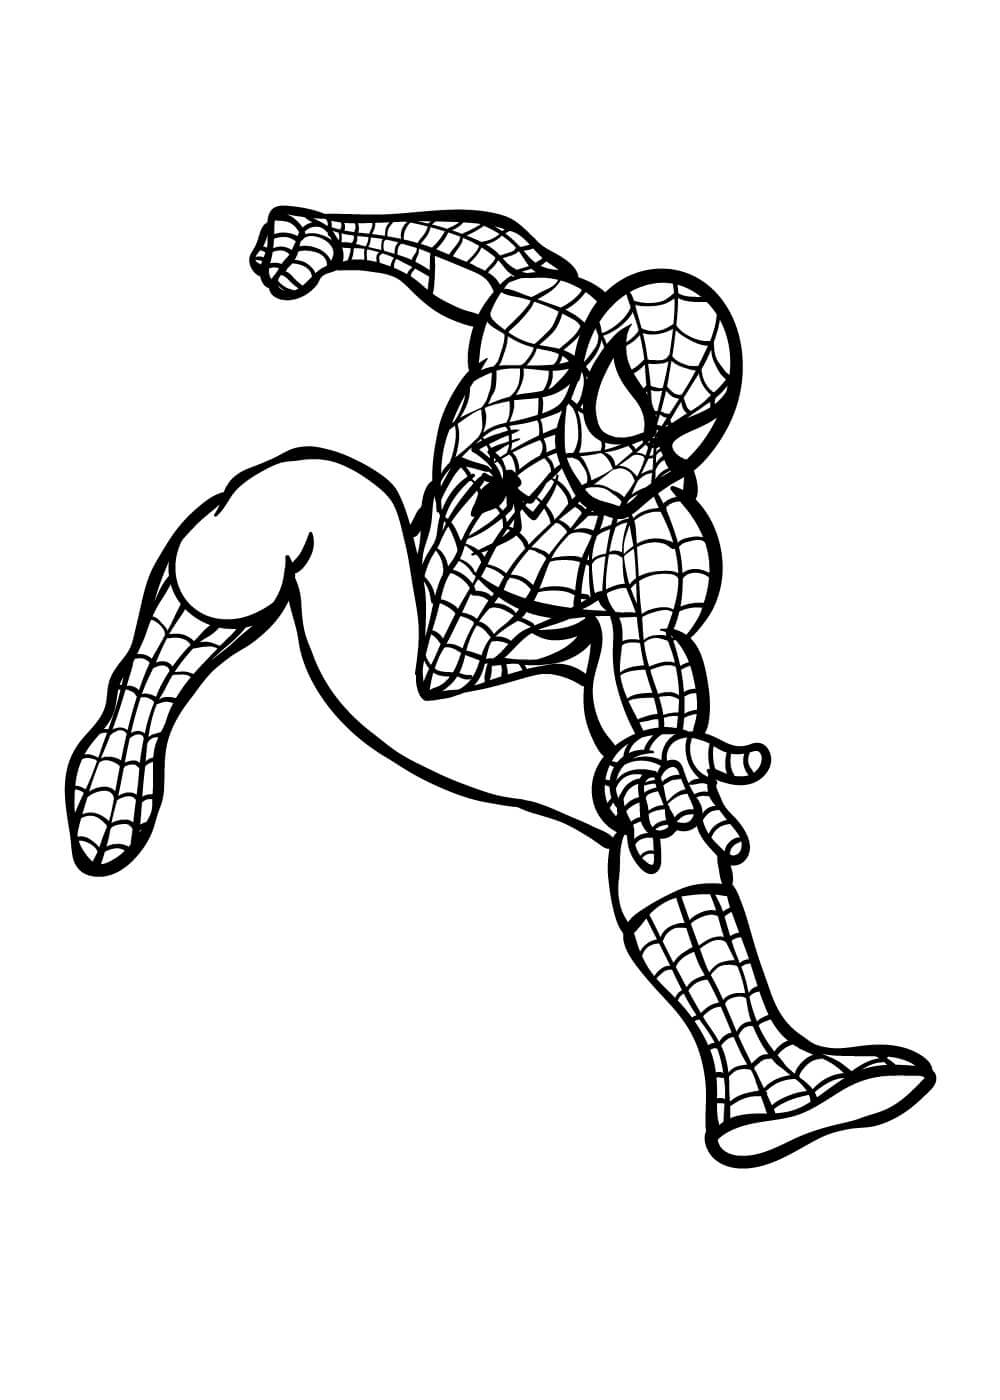 Spiderman 13 coloring page